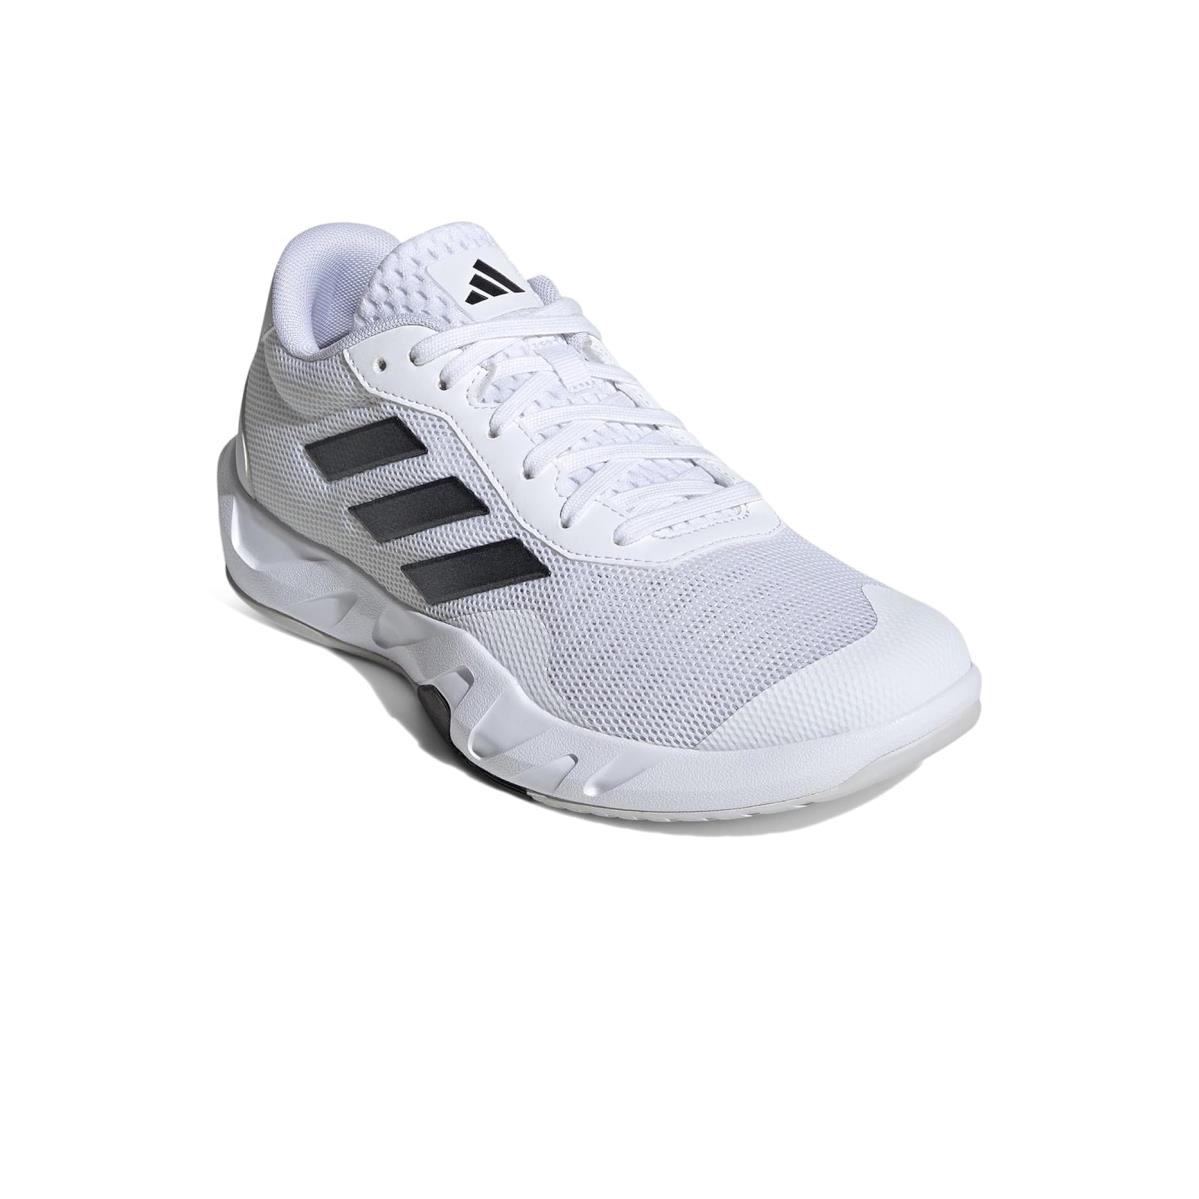 Woman`s Sneakers Athletic Shoes Adidas Amplimove Trainer White/Black/Grey